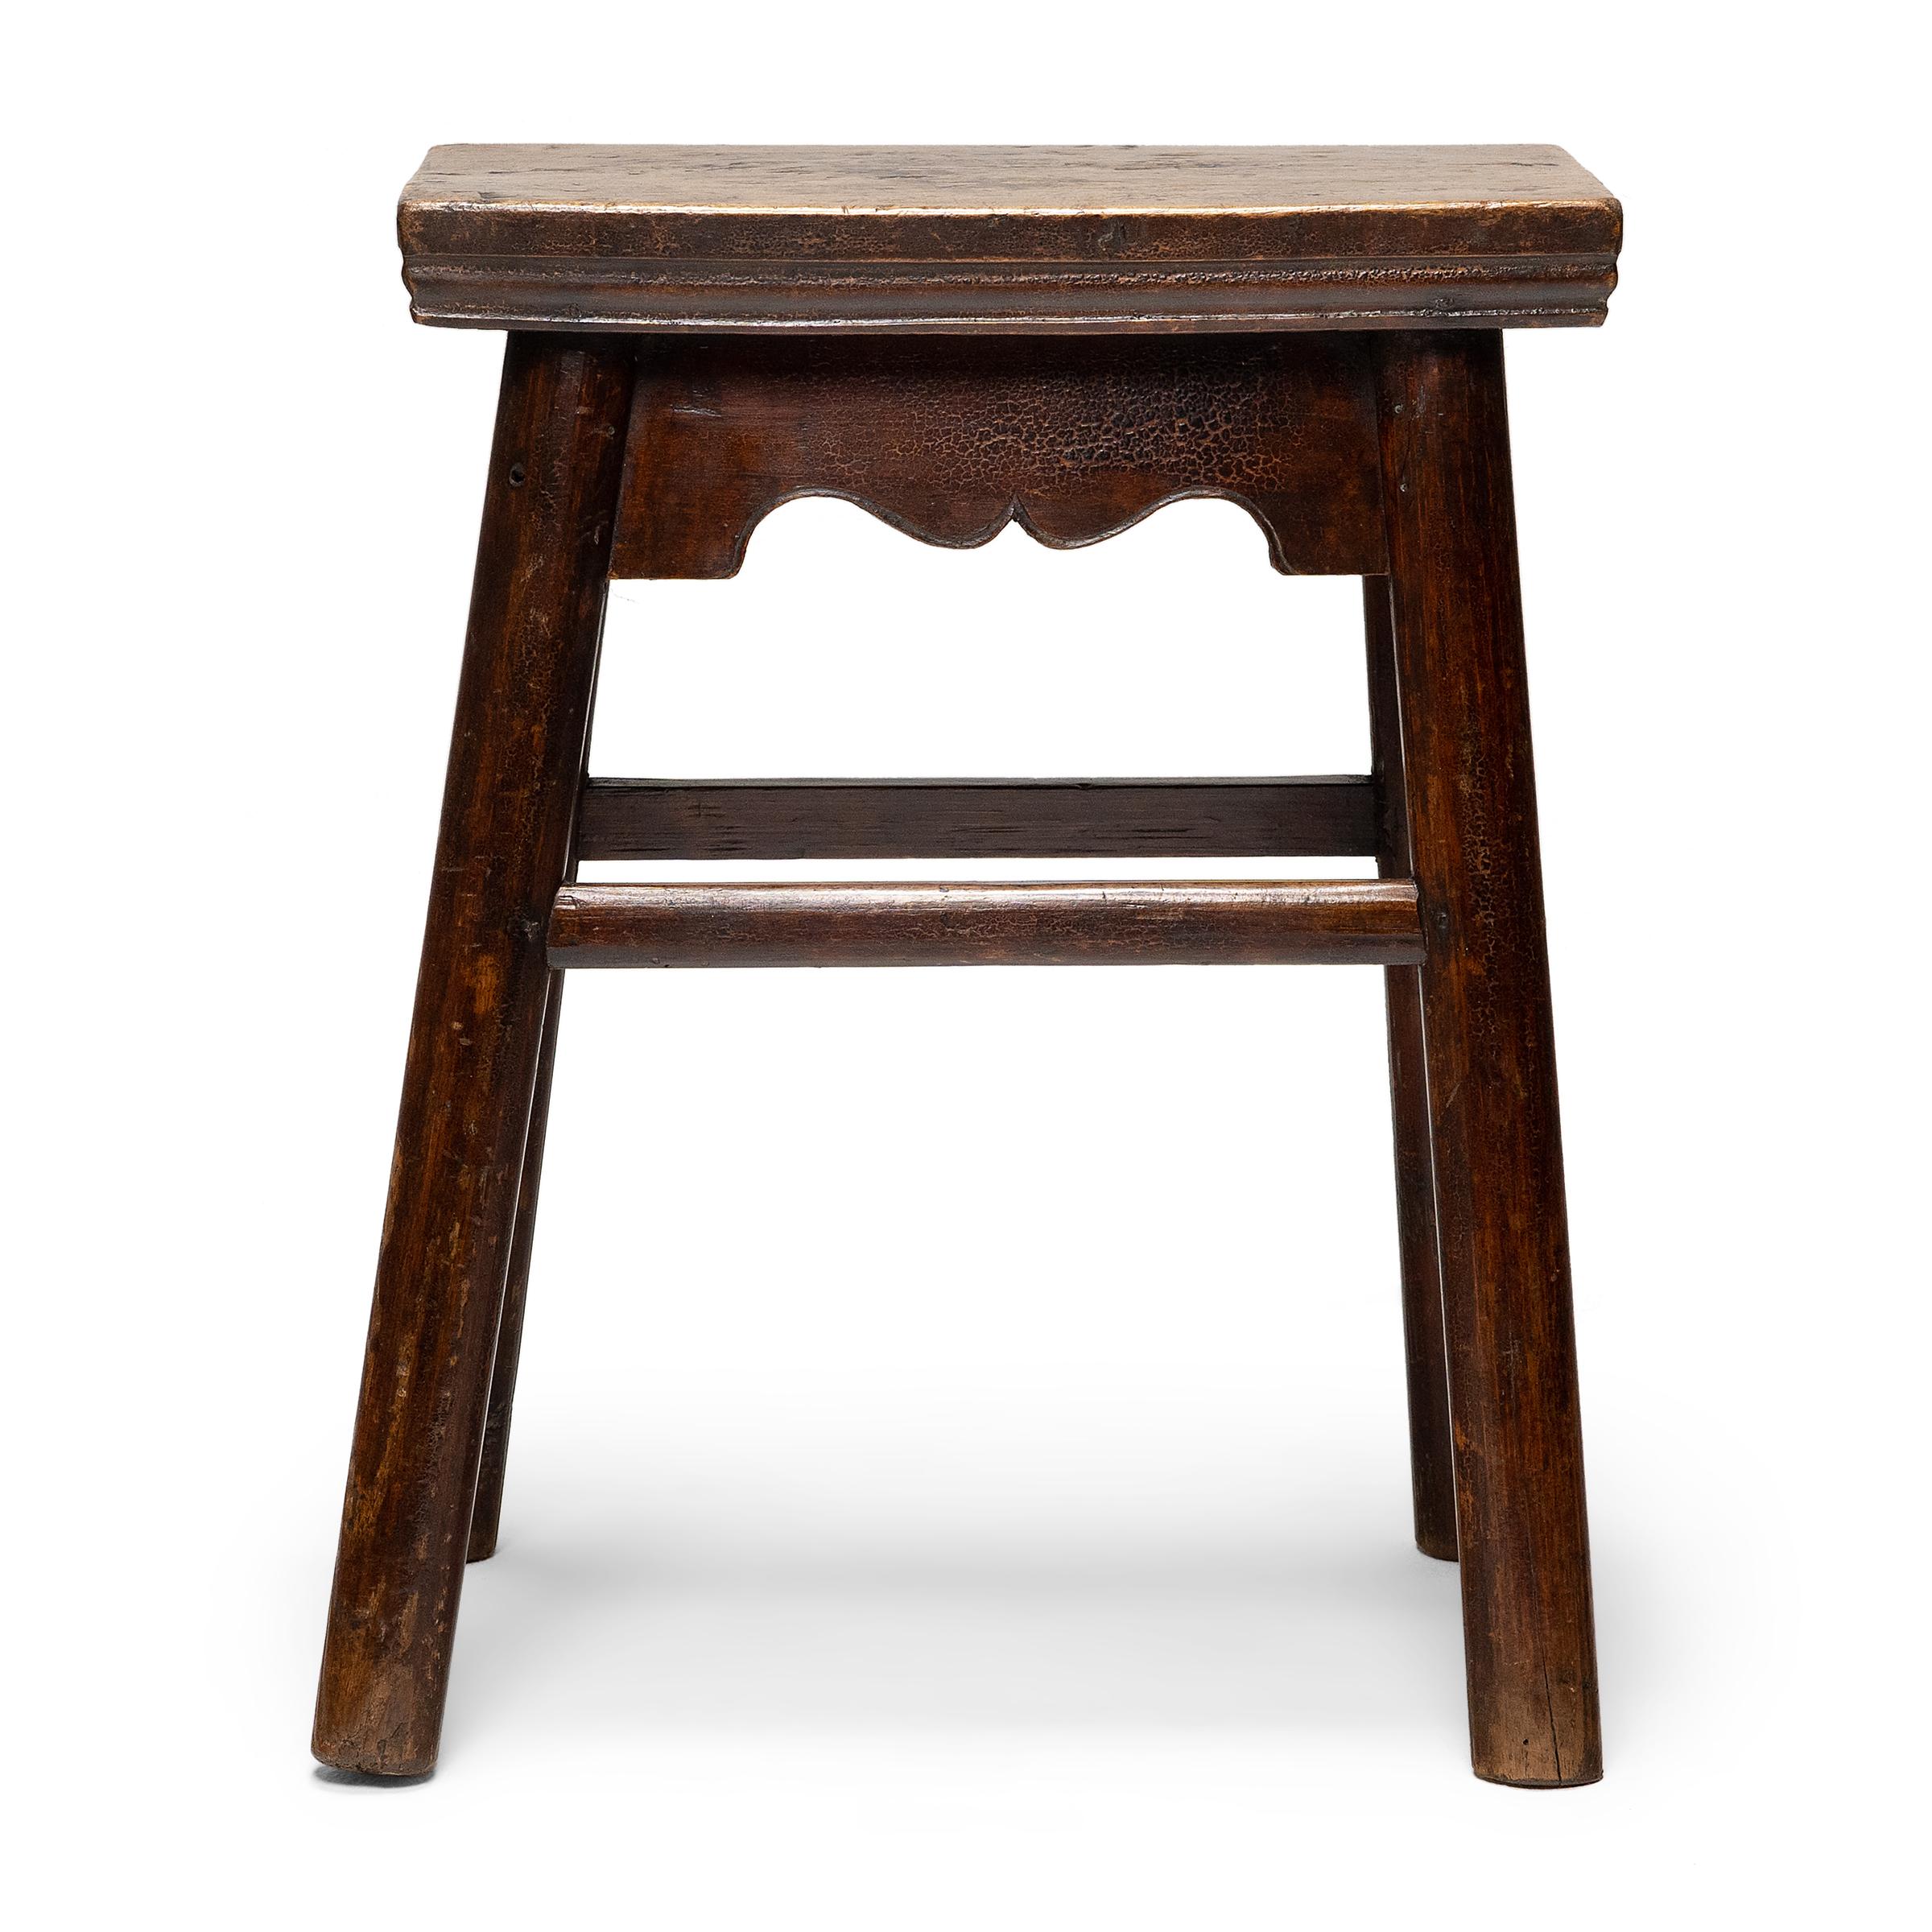 This Chinese courtyard stool dates to the mid-19th century and has a classic splayed leg design with round legs and a rectangular seat. The stool is crafted of northern elmwood (yumu) using traditional mortise and tenon joinery, plus the added